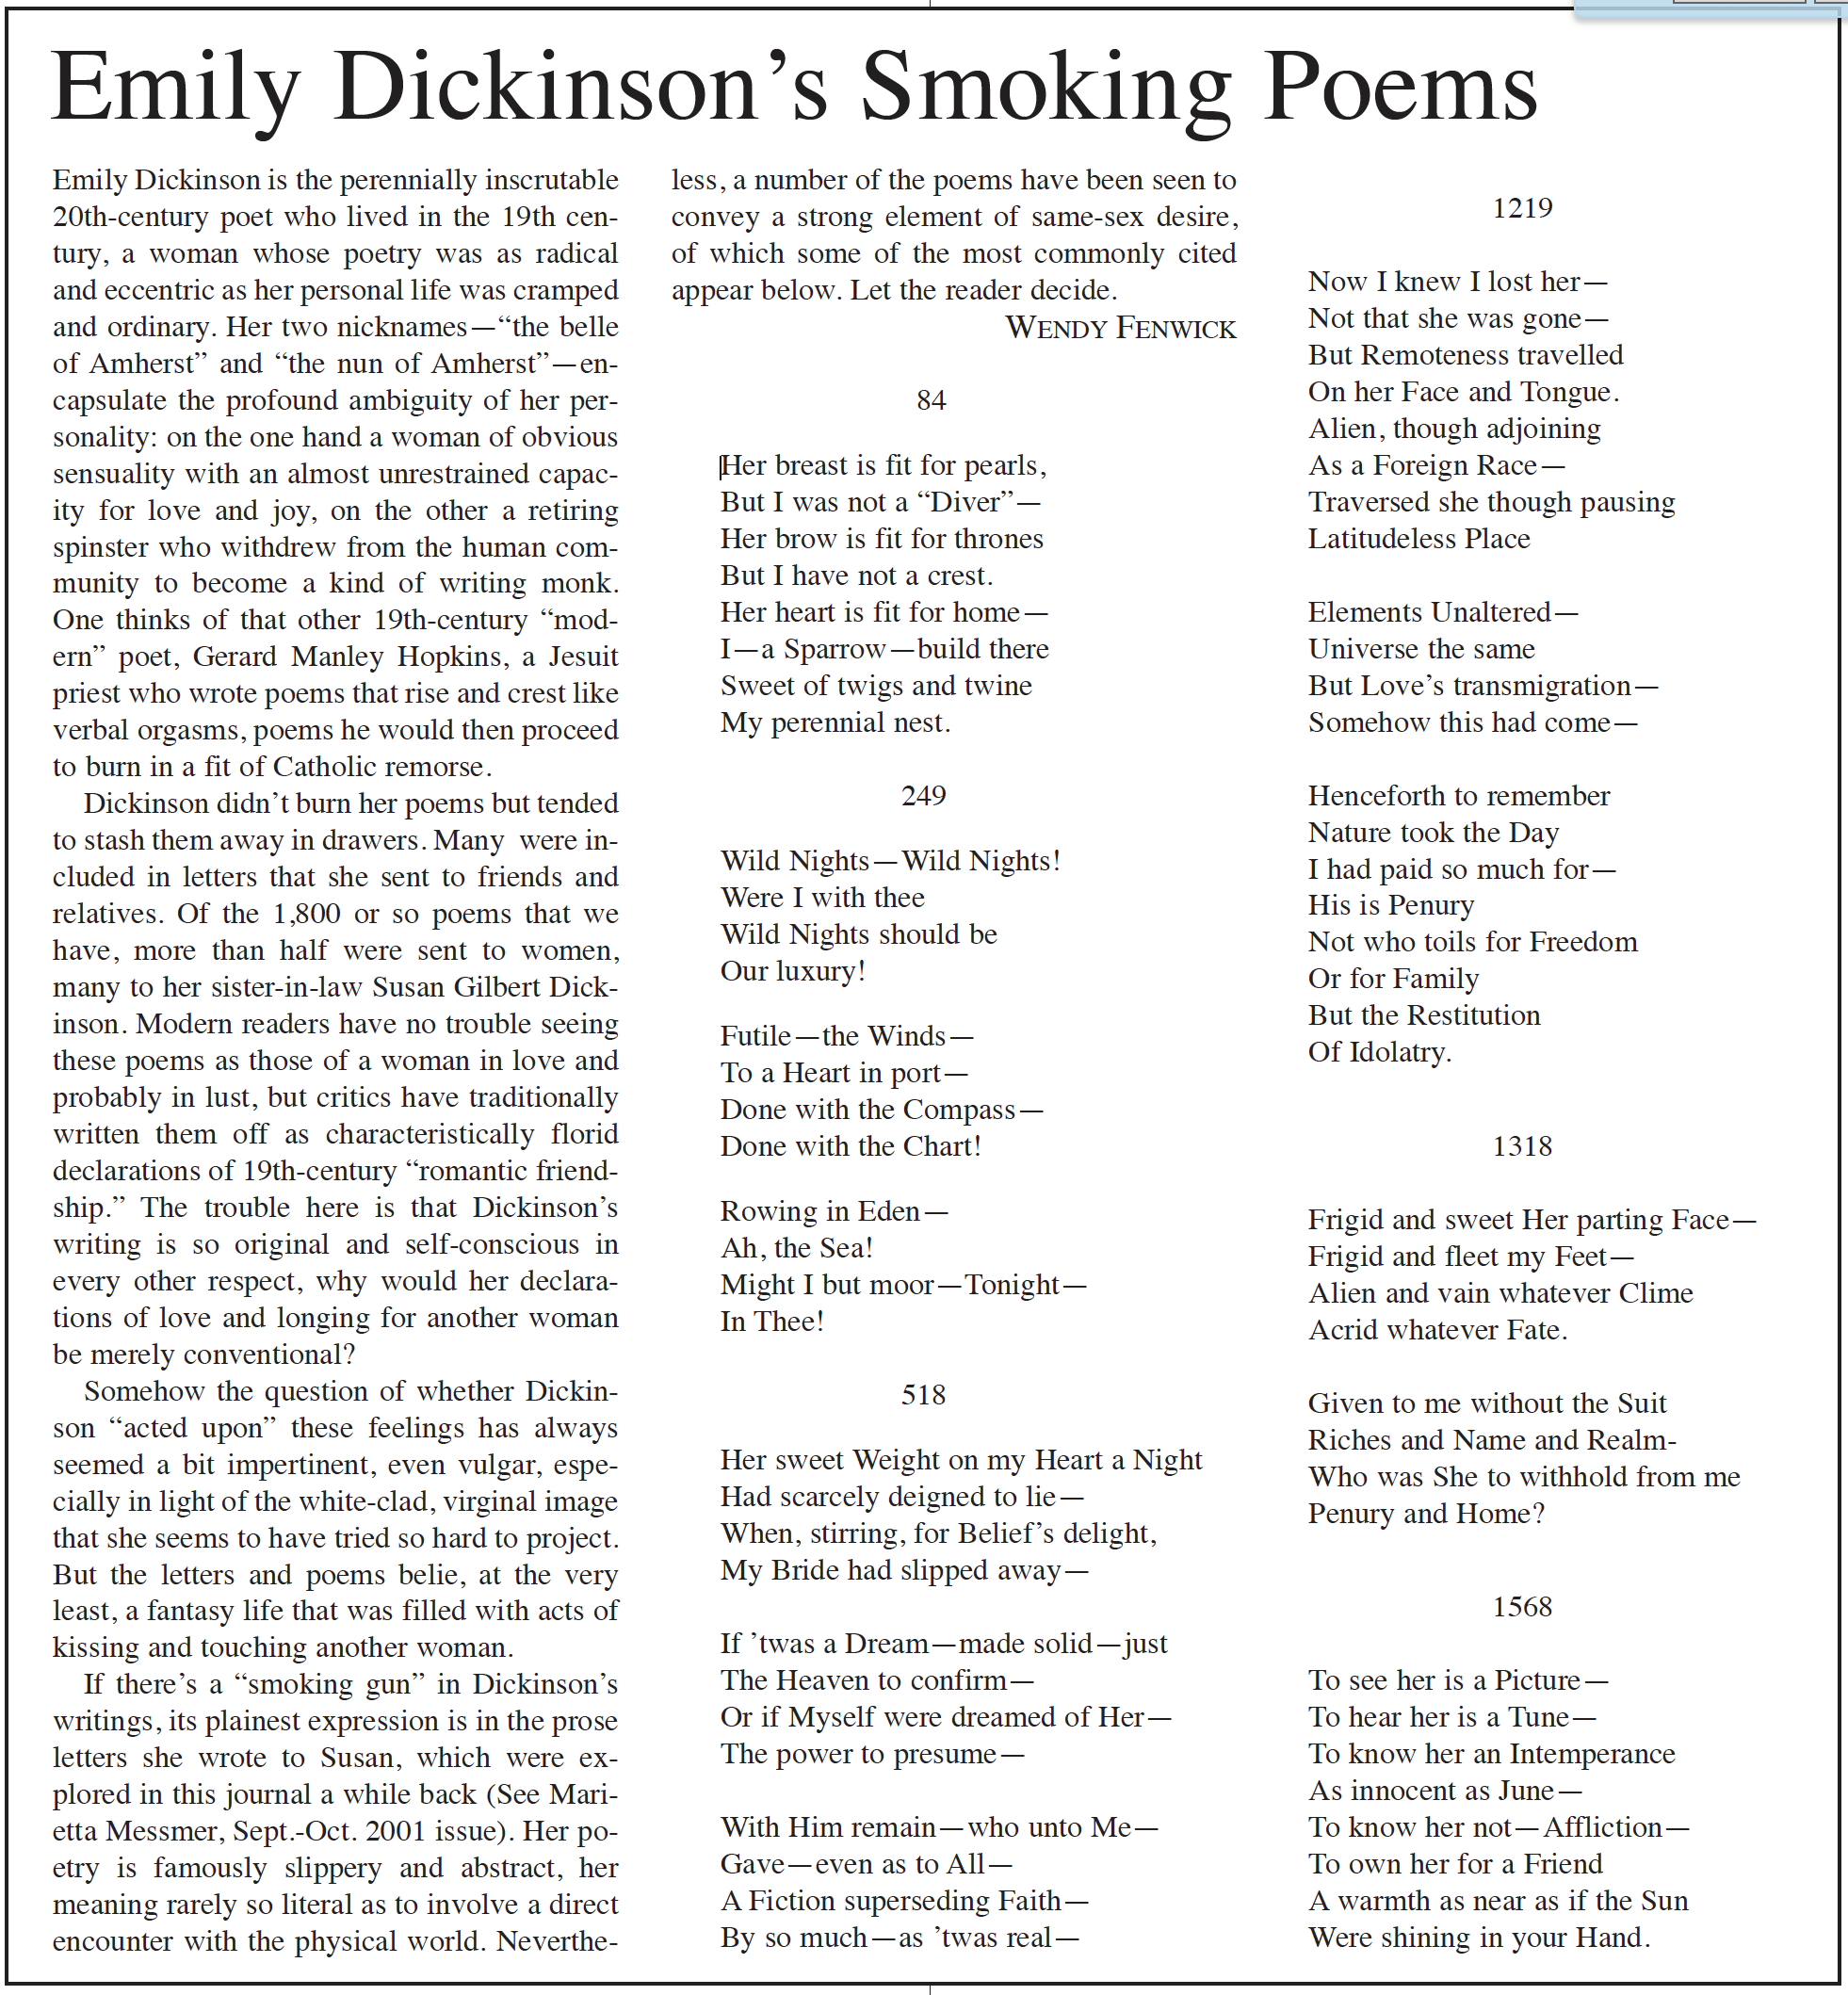 Emily Dickinson's Smoking Poems - The Gay & Lesbian Review